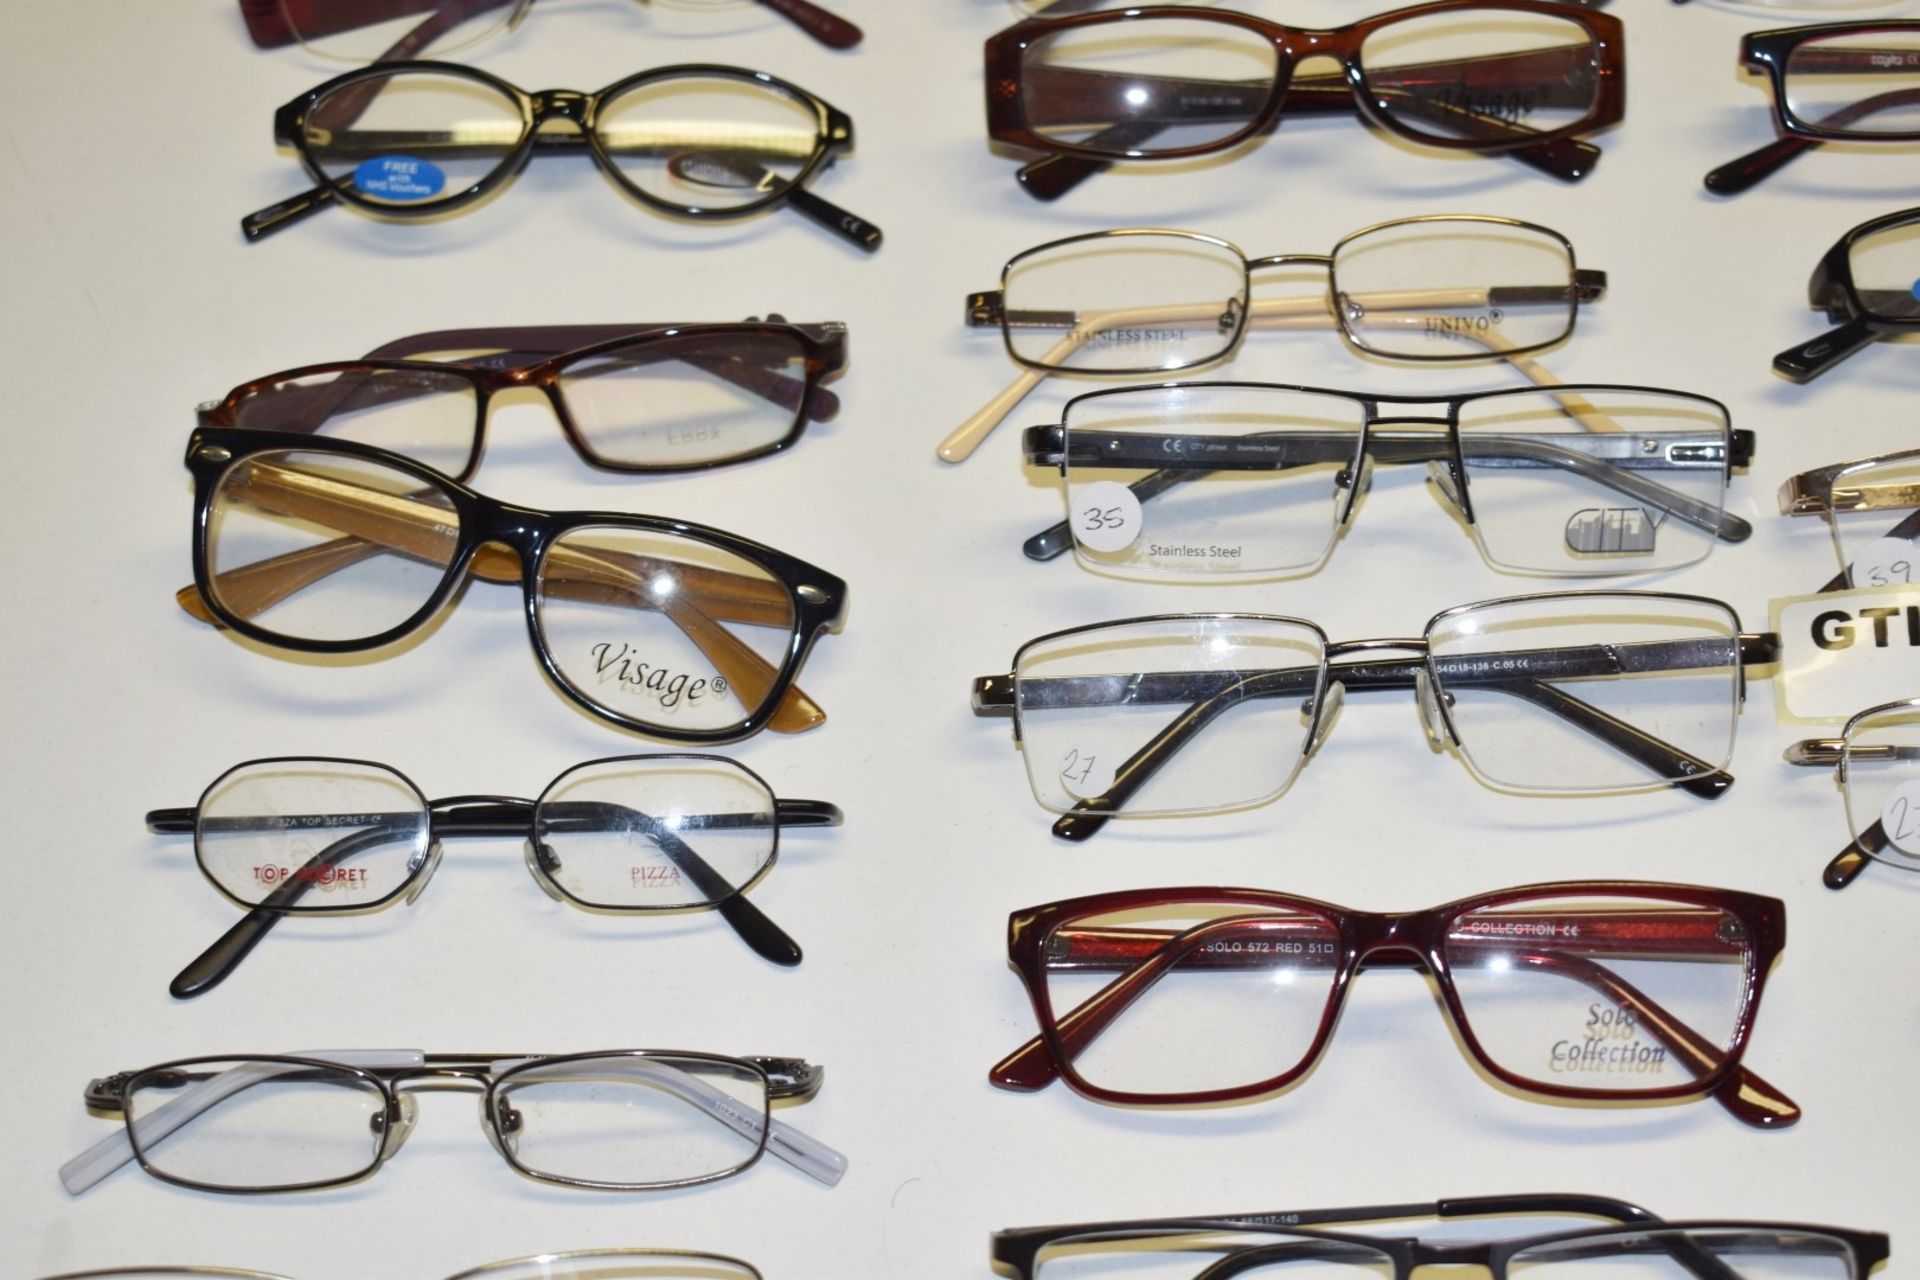 50 x Assorted Pairs of Spectacle Eye Glasses - New and Unused Stock - Various Designs and Brands - Image 5 of 15